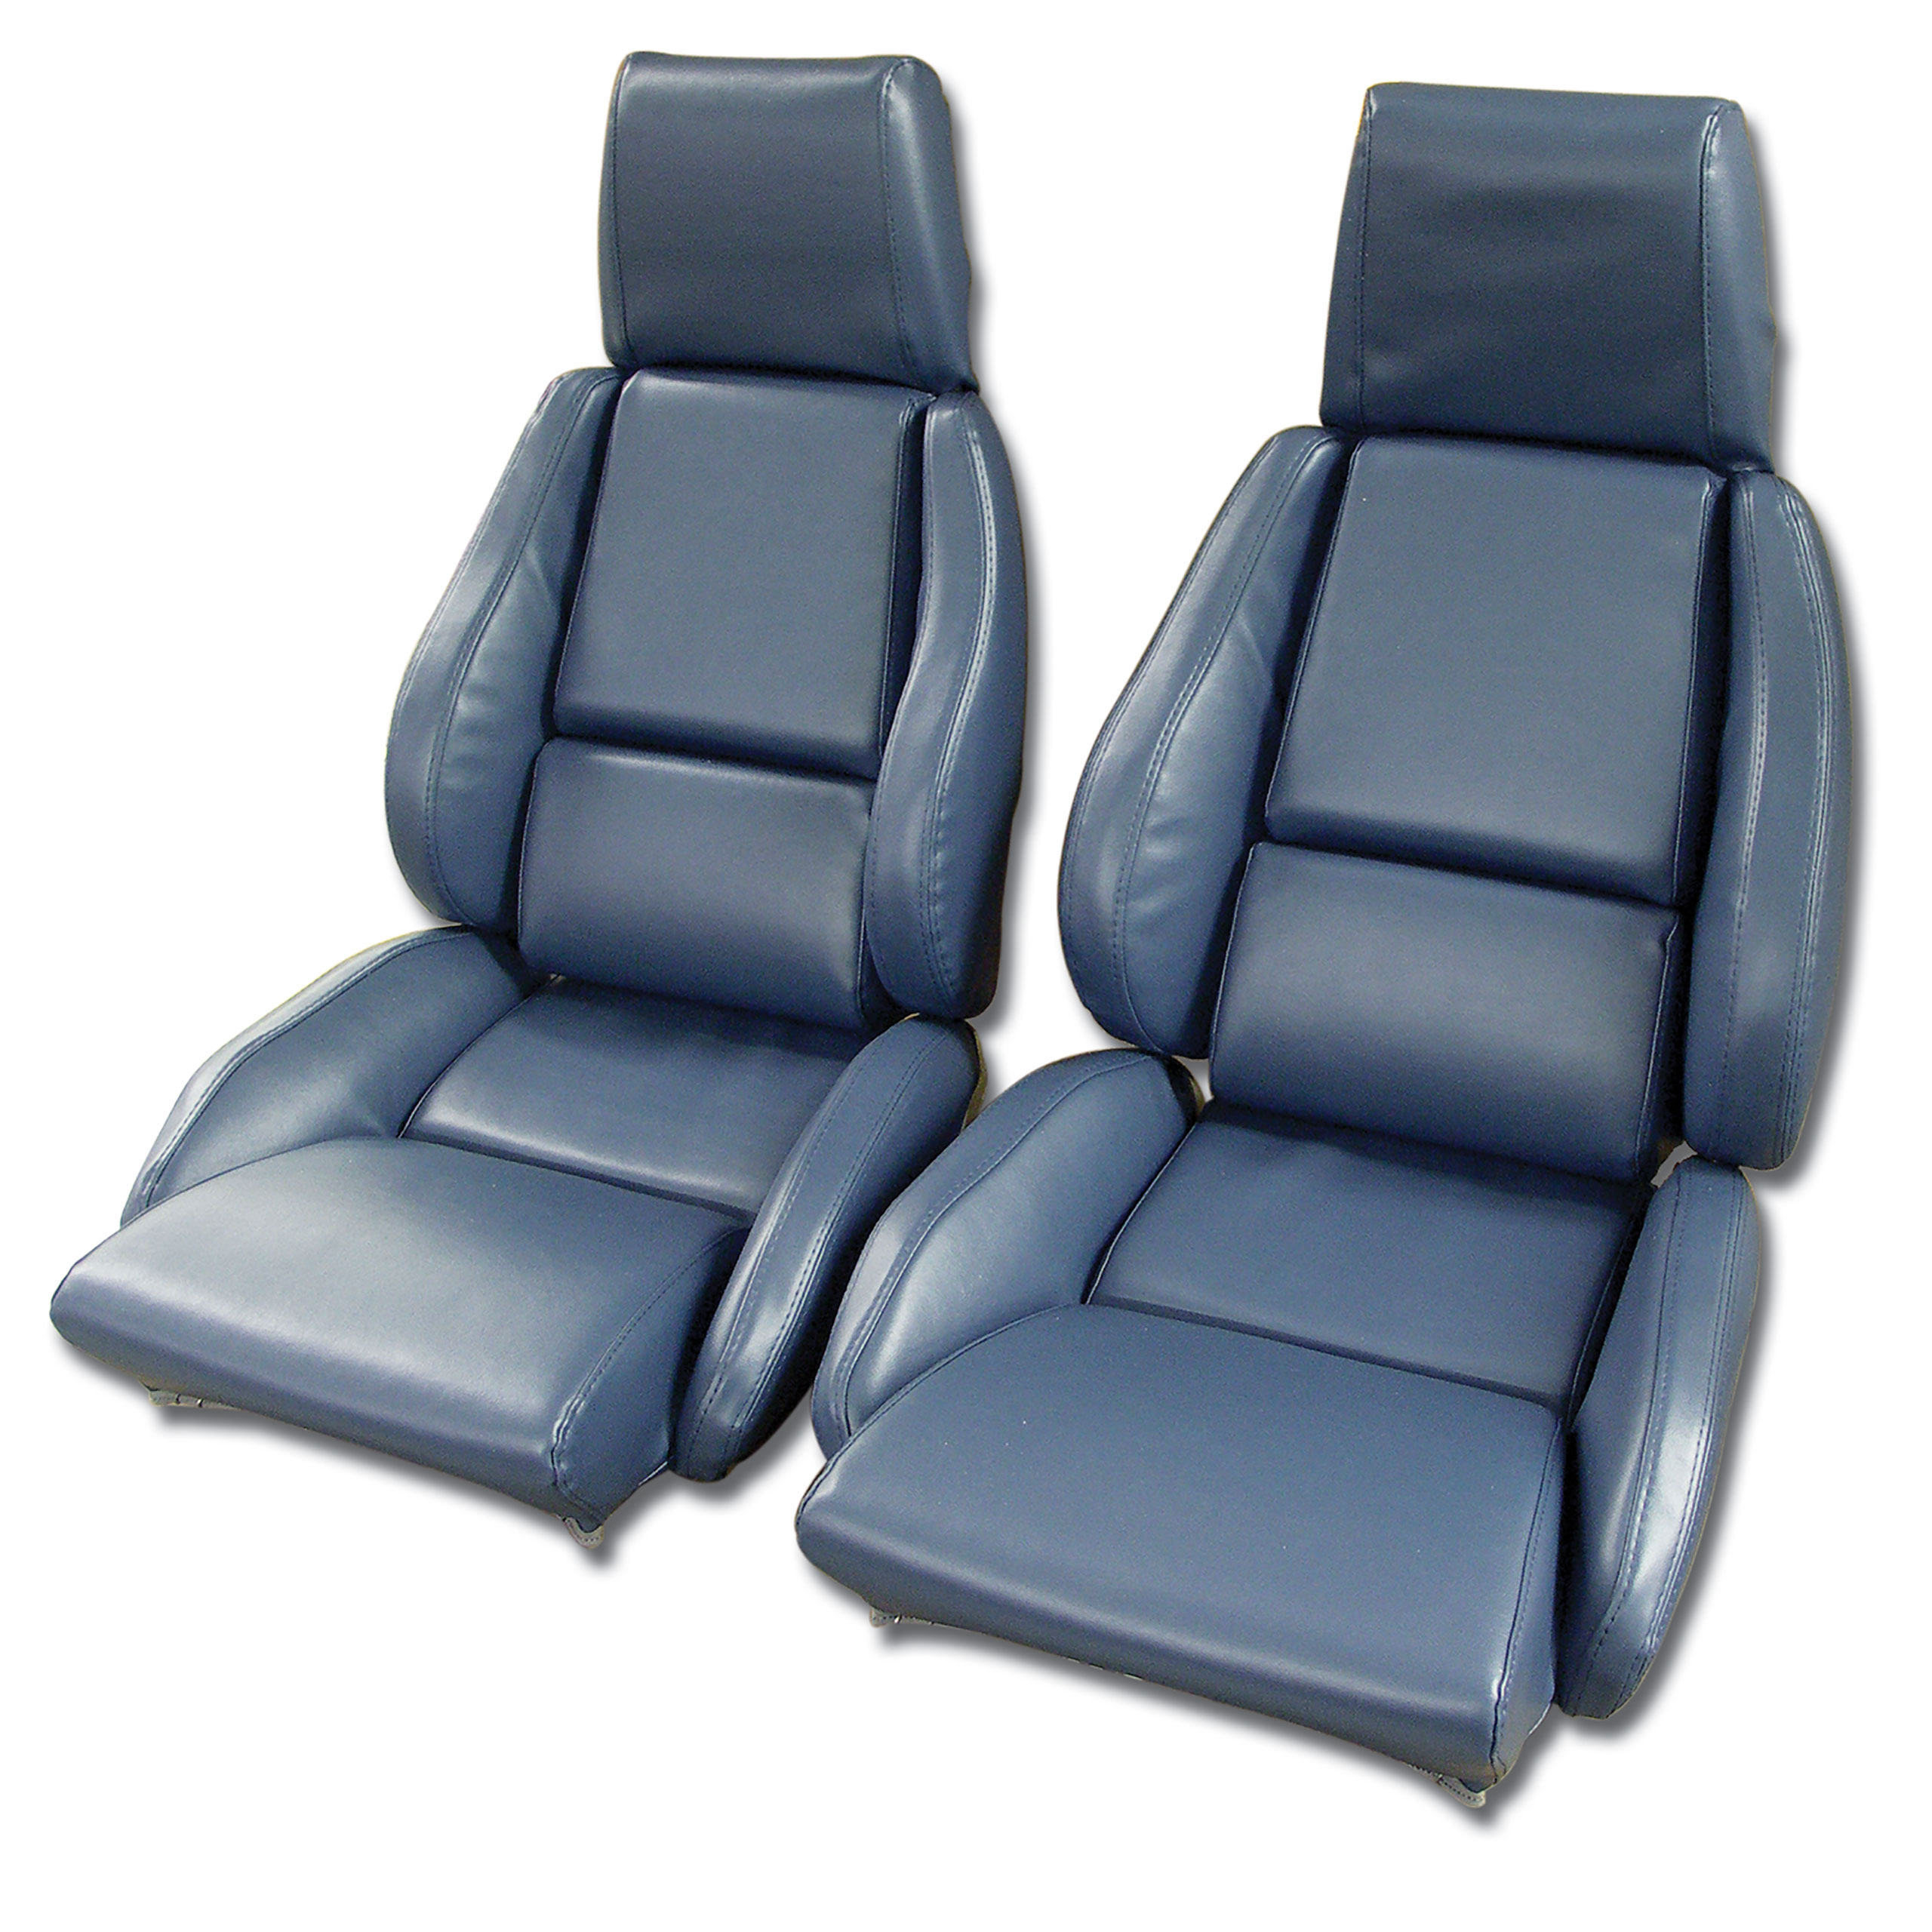 84-85 Corvette C4 468470 OE Style 100% Leather Standard Seat Covers W/O Perforated Inserts Blue CA-468770 